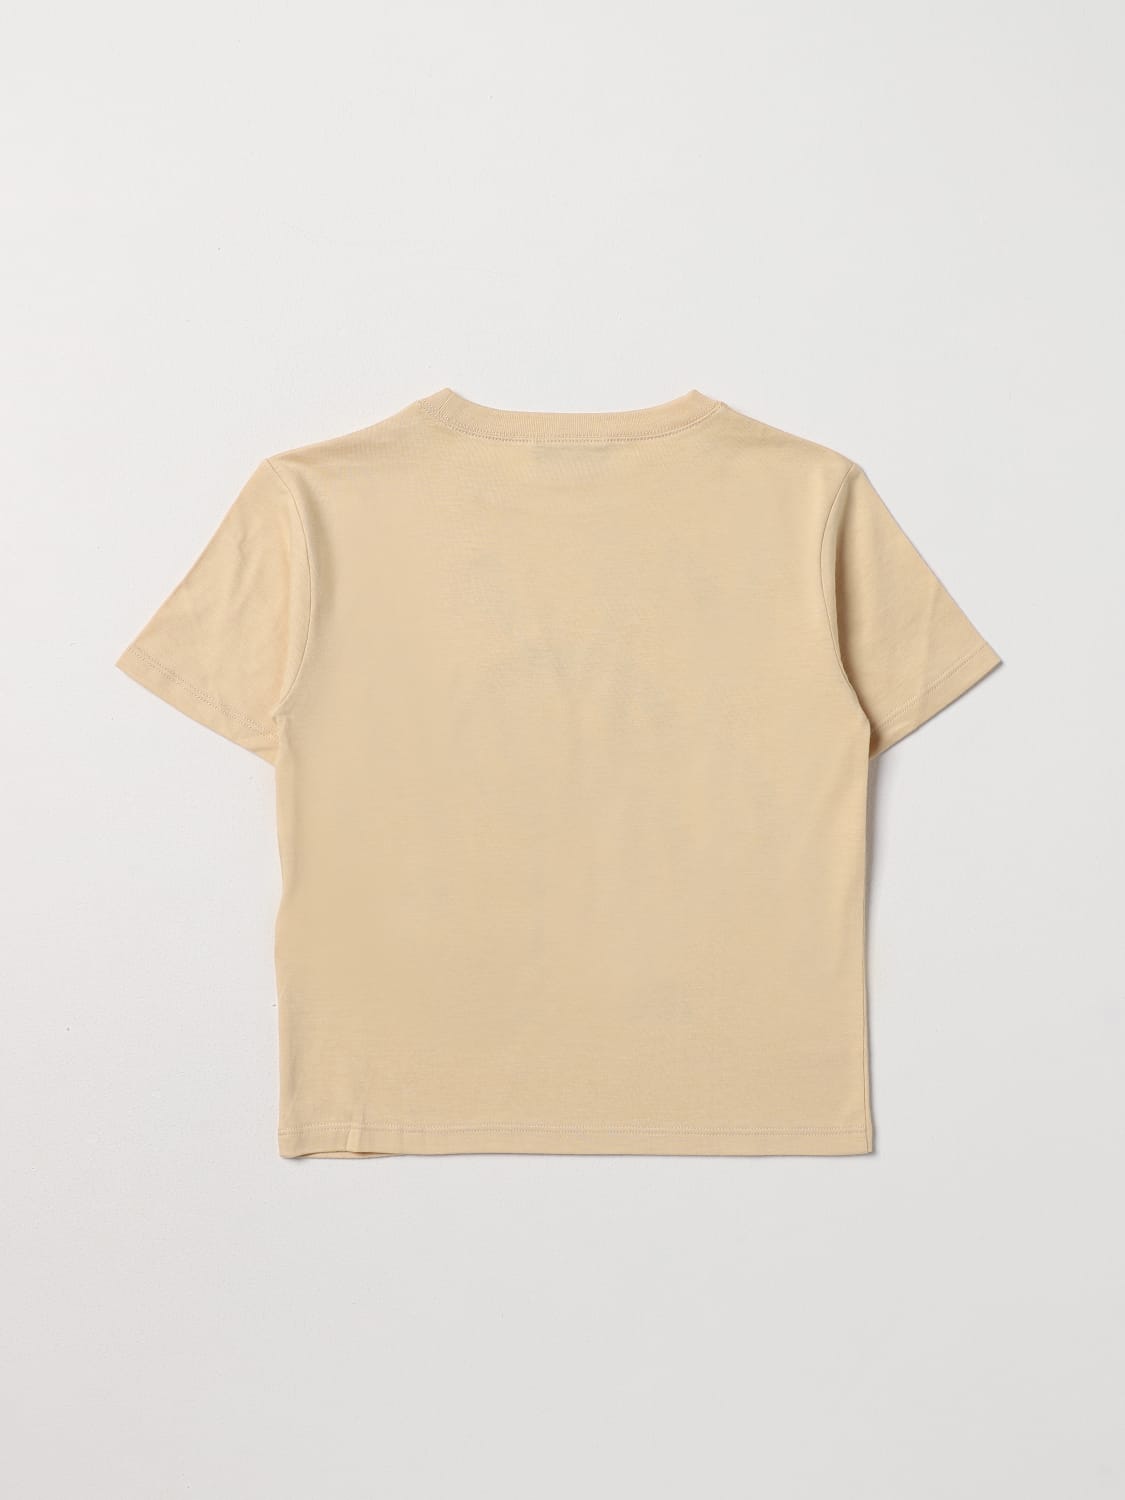 Logo Cotton Jersey T Shirt in White - Gucci